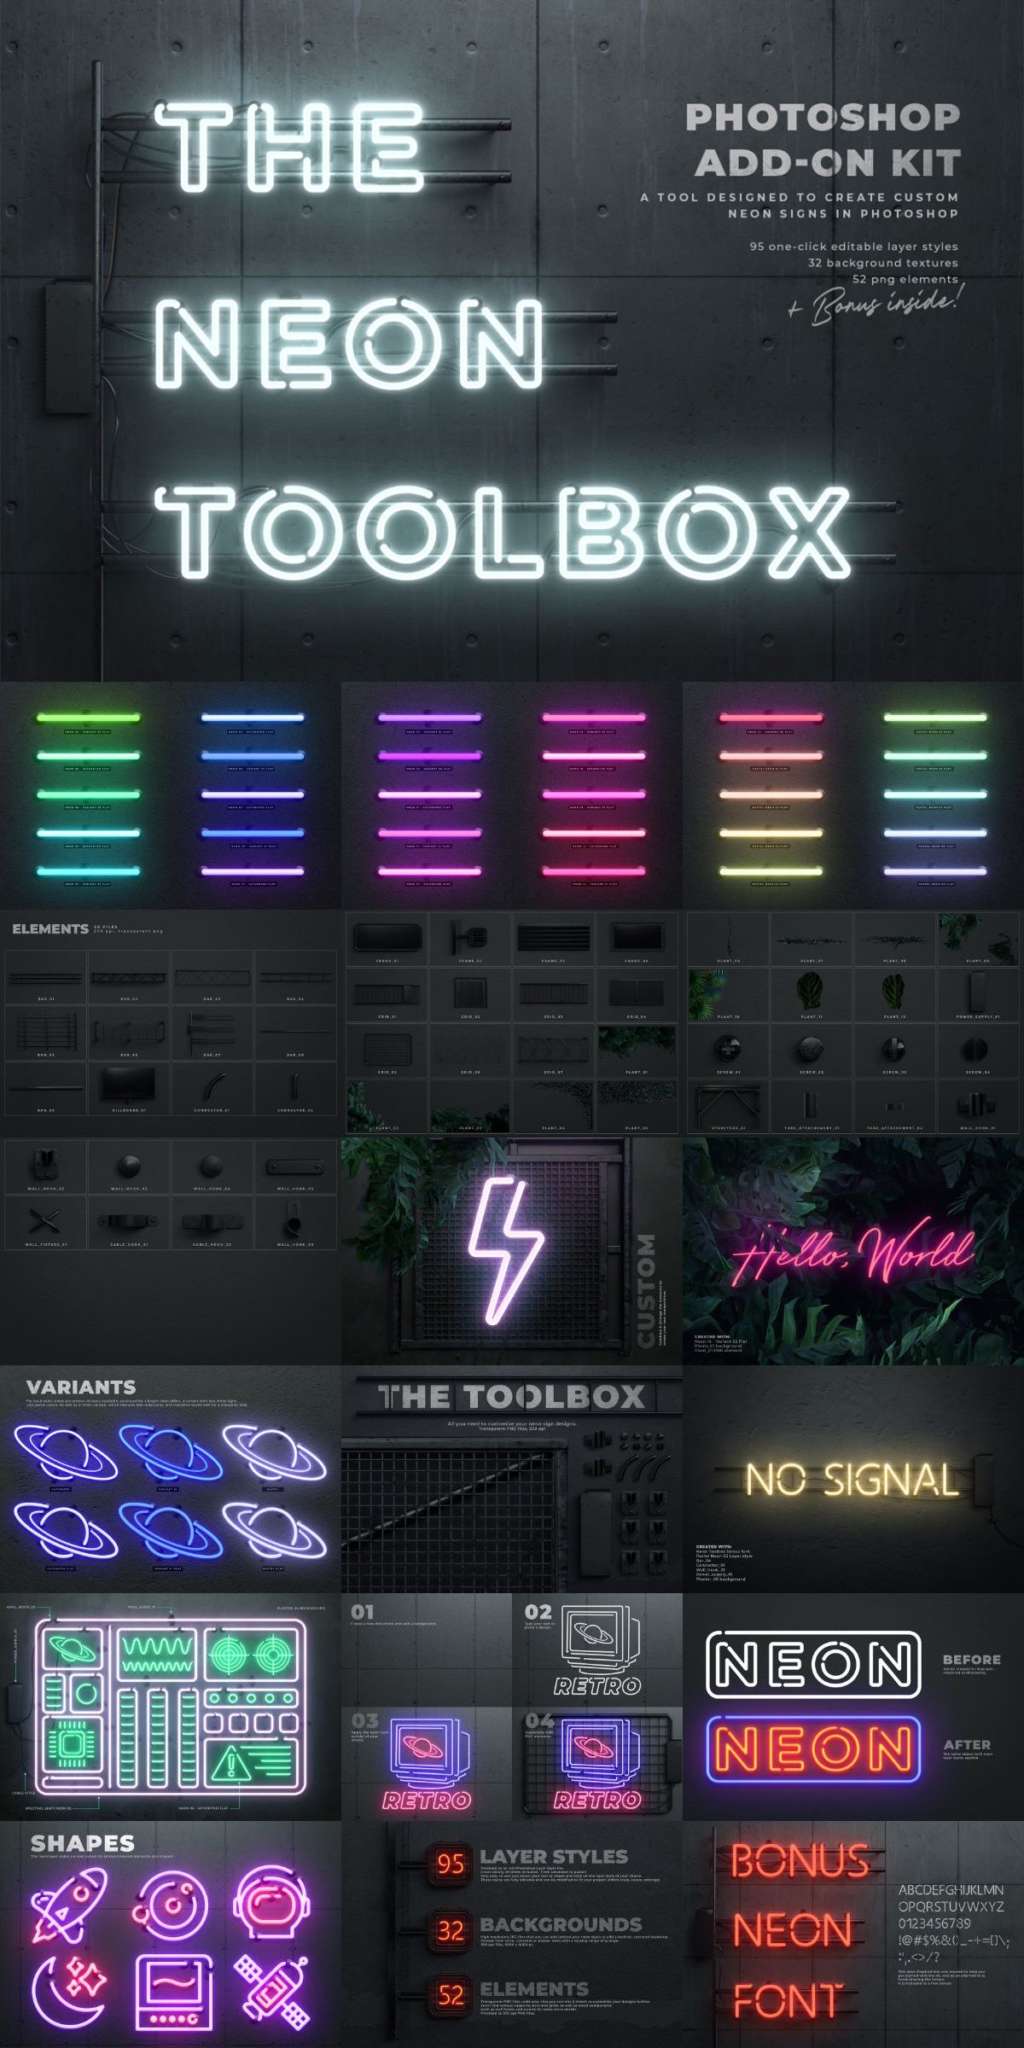 The Neon Toolbox
